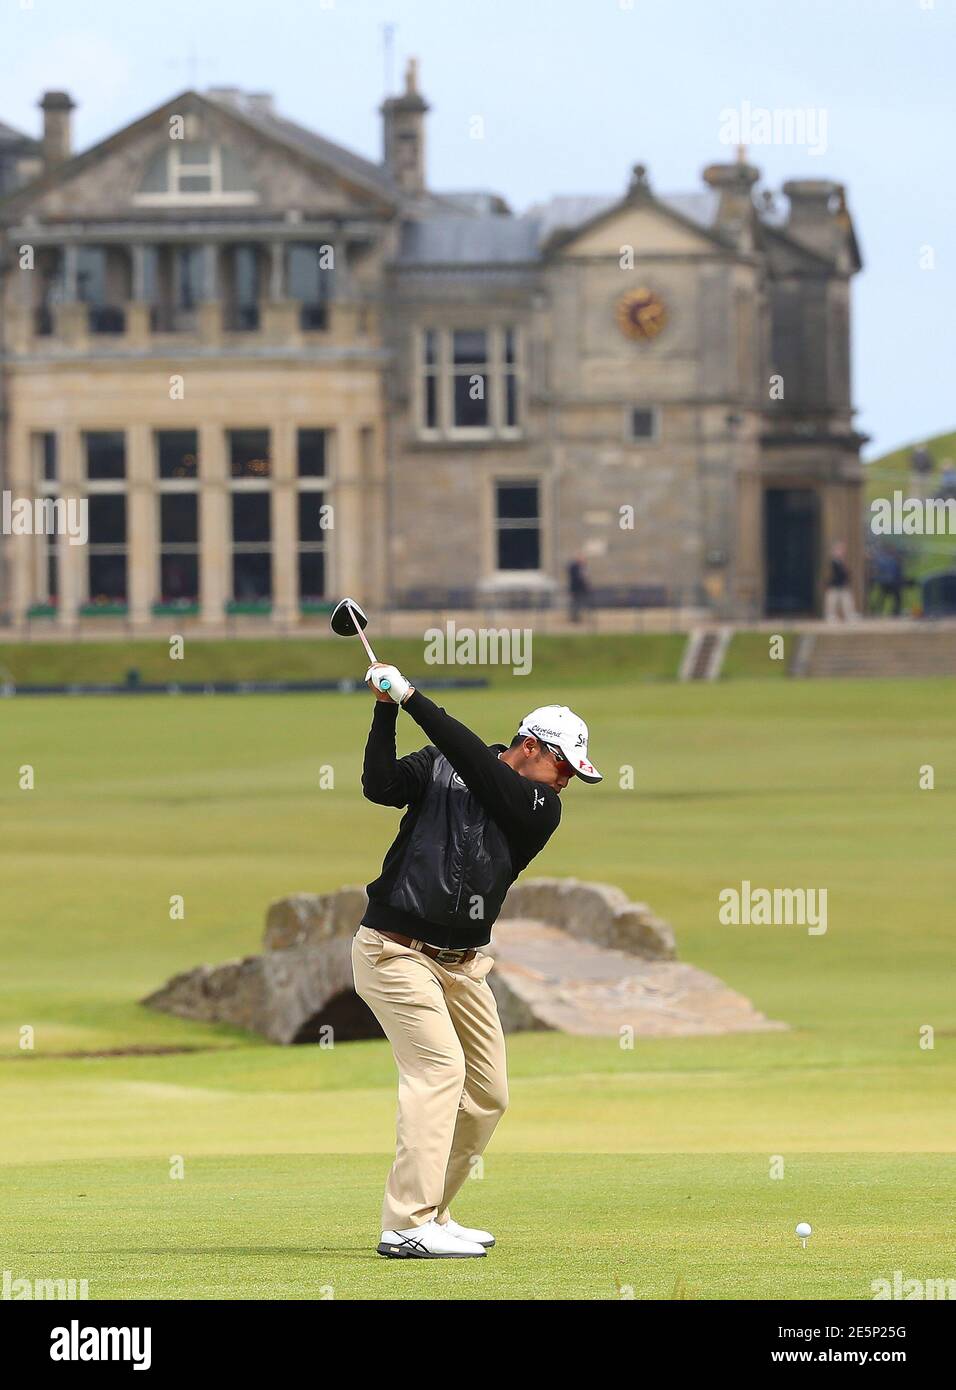 Hideki Matsuyama of Japan hits his tee shot on the 18th hole during the first round of the British Open golf championship on the Old Course in St. Andrews, Scotland, July 16, 2015.    REUTERS/Eddie Keogh Stock Photo